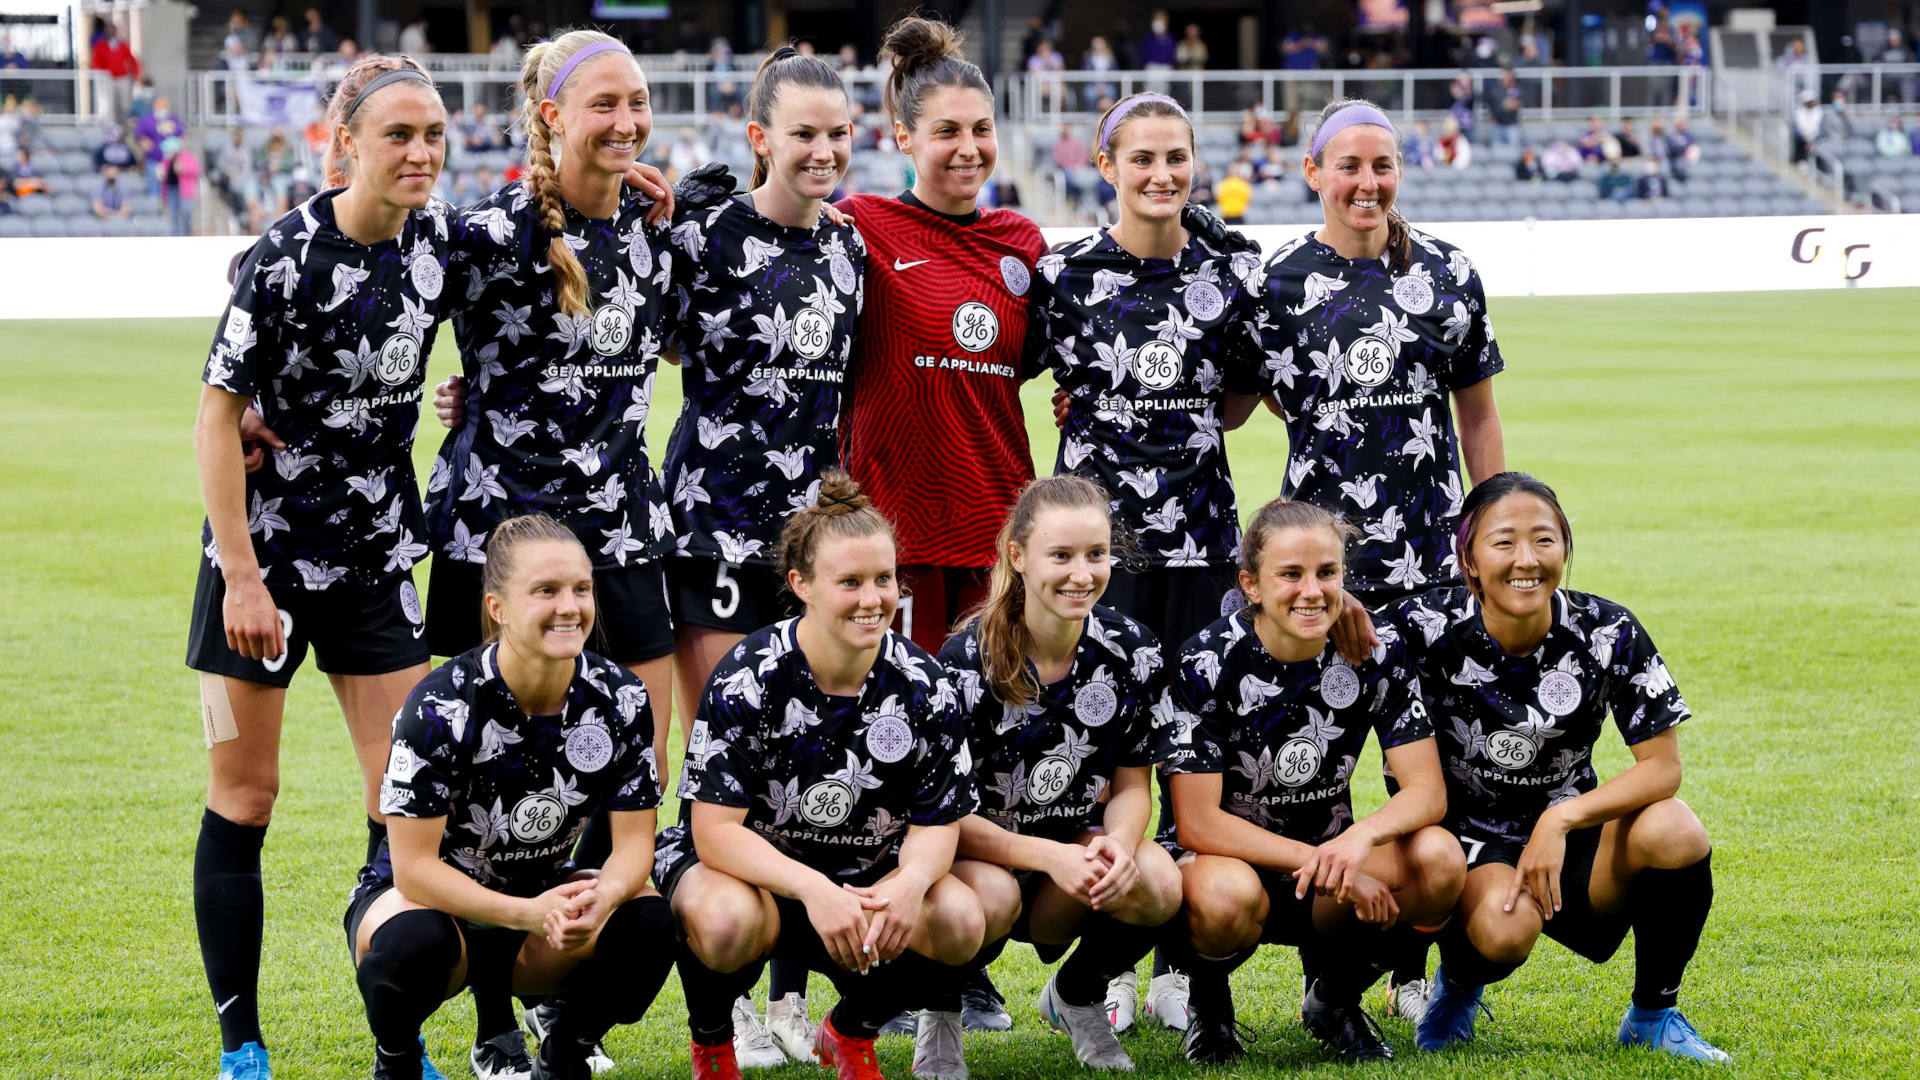 What Every NWSL Team's Jersey Colors Mean - Girls Soccer Network